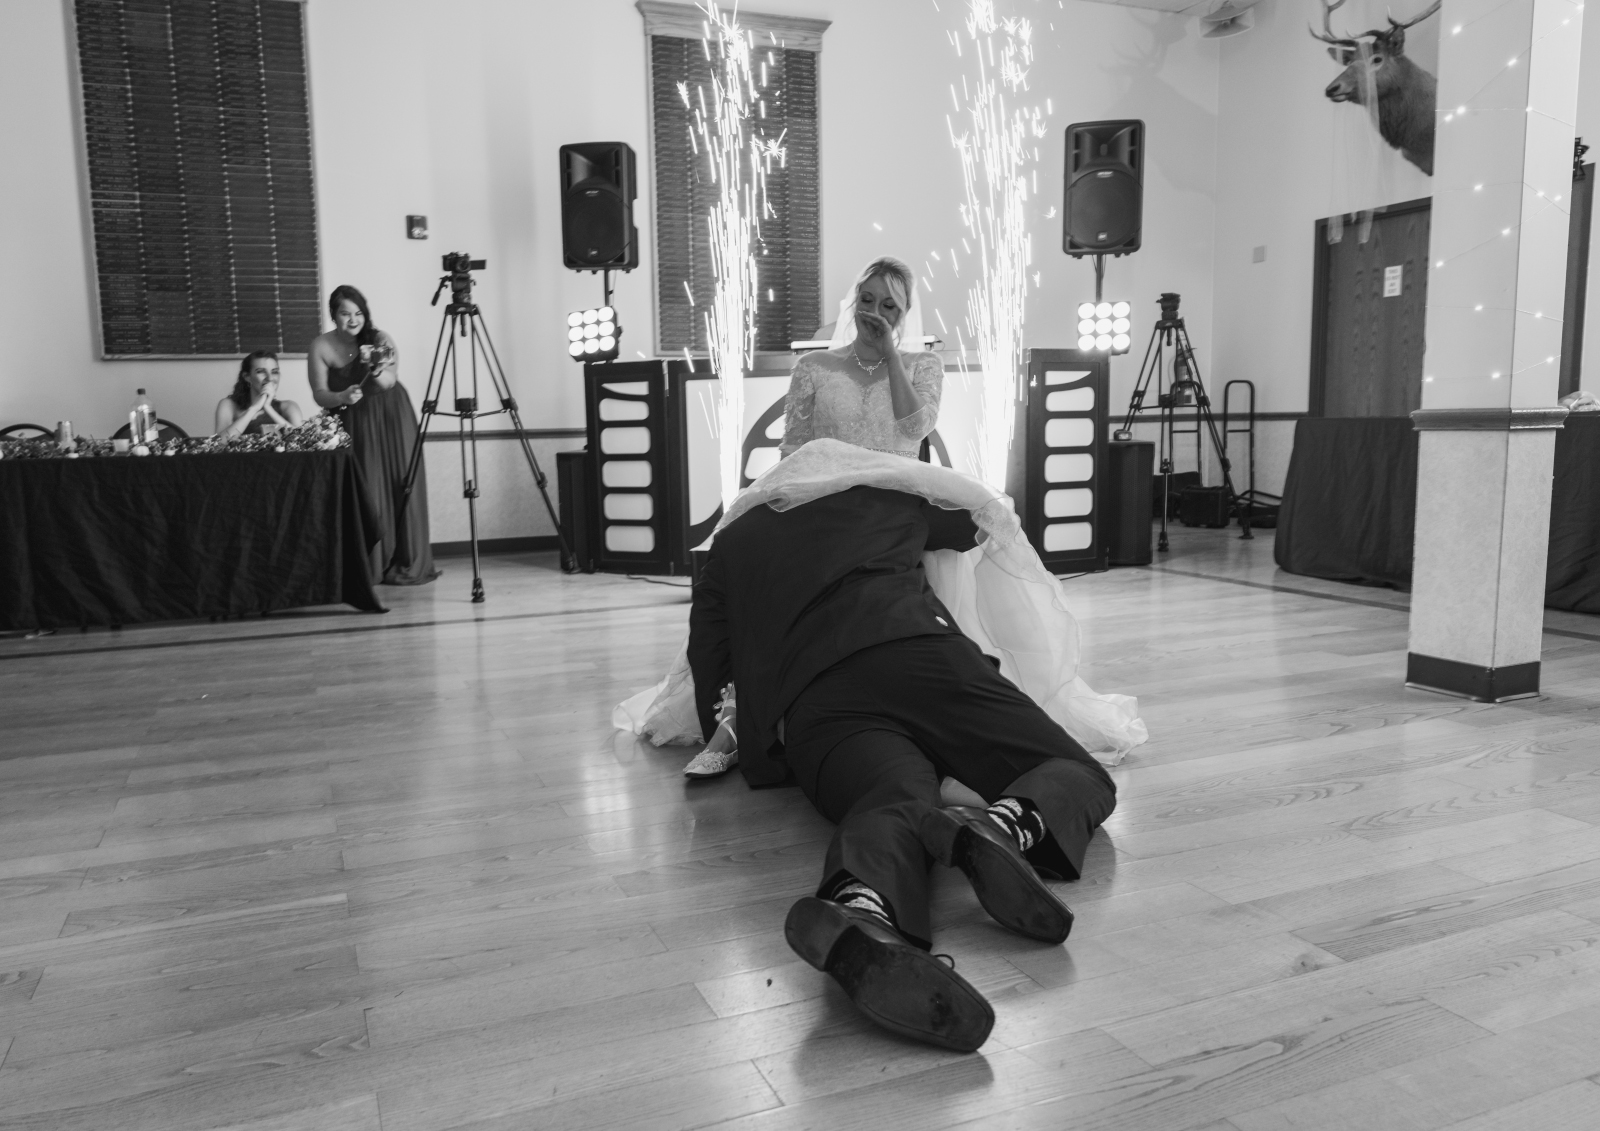 Bride and groom, garter removal, funny wedding photo, black and white, sparks, indoor fireworks, Sparkular cool sparkler machine, fall wedding, cute fall wedding reception at Grand Pacific Wedding Gardens